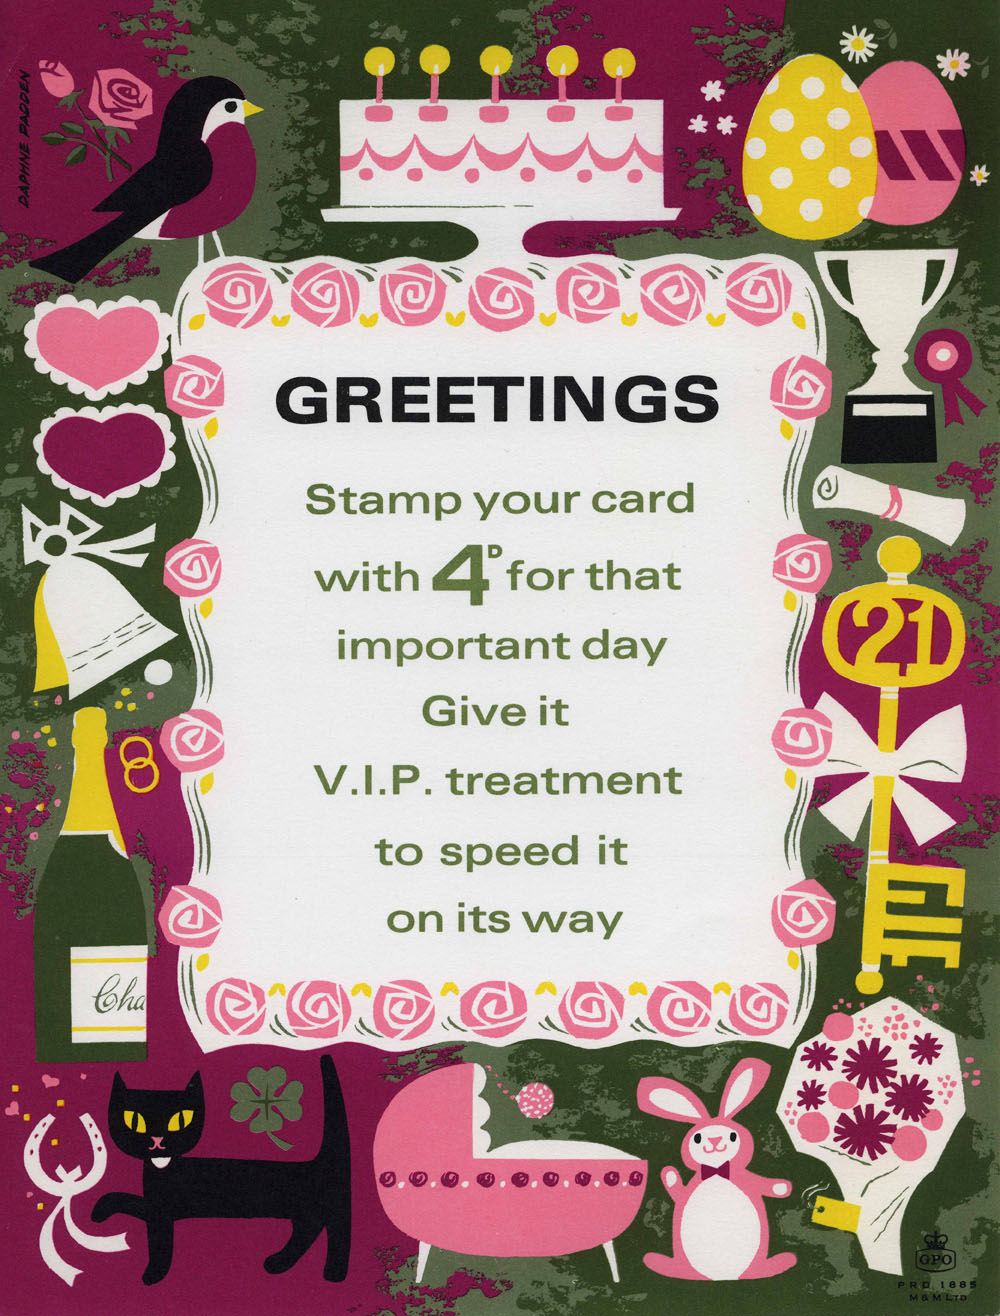 Greetings: Stamp your card with 4d for that important day